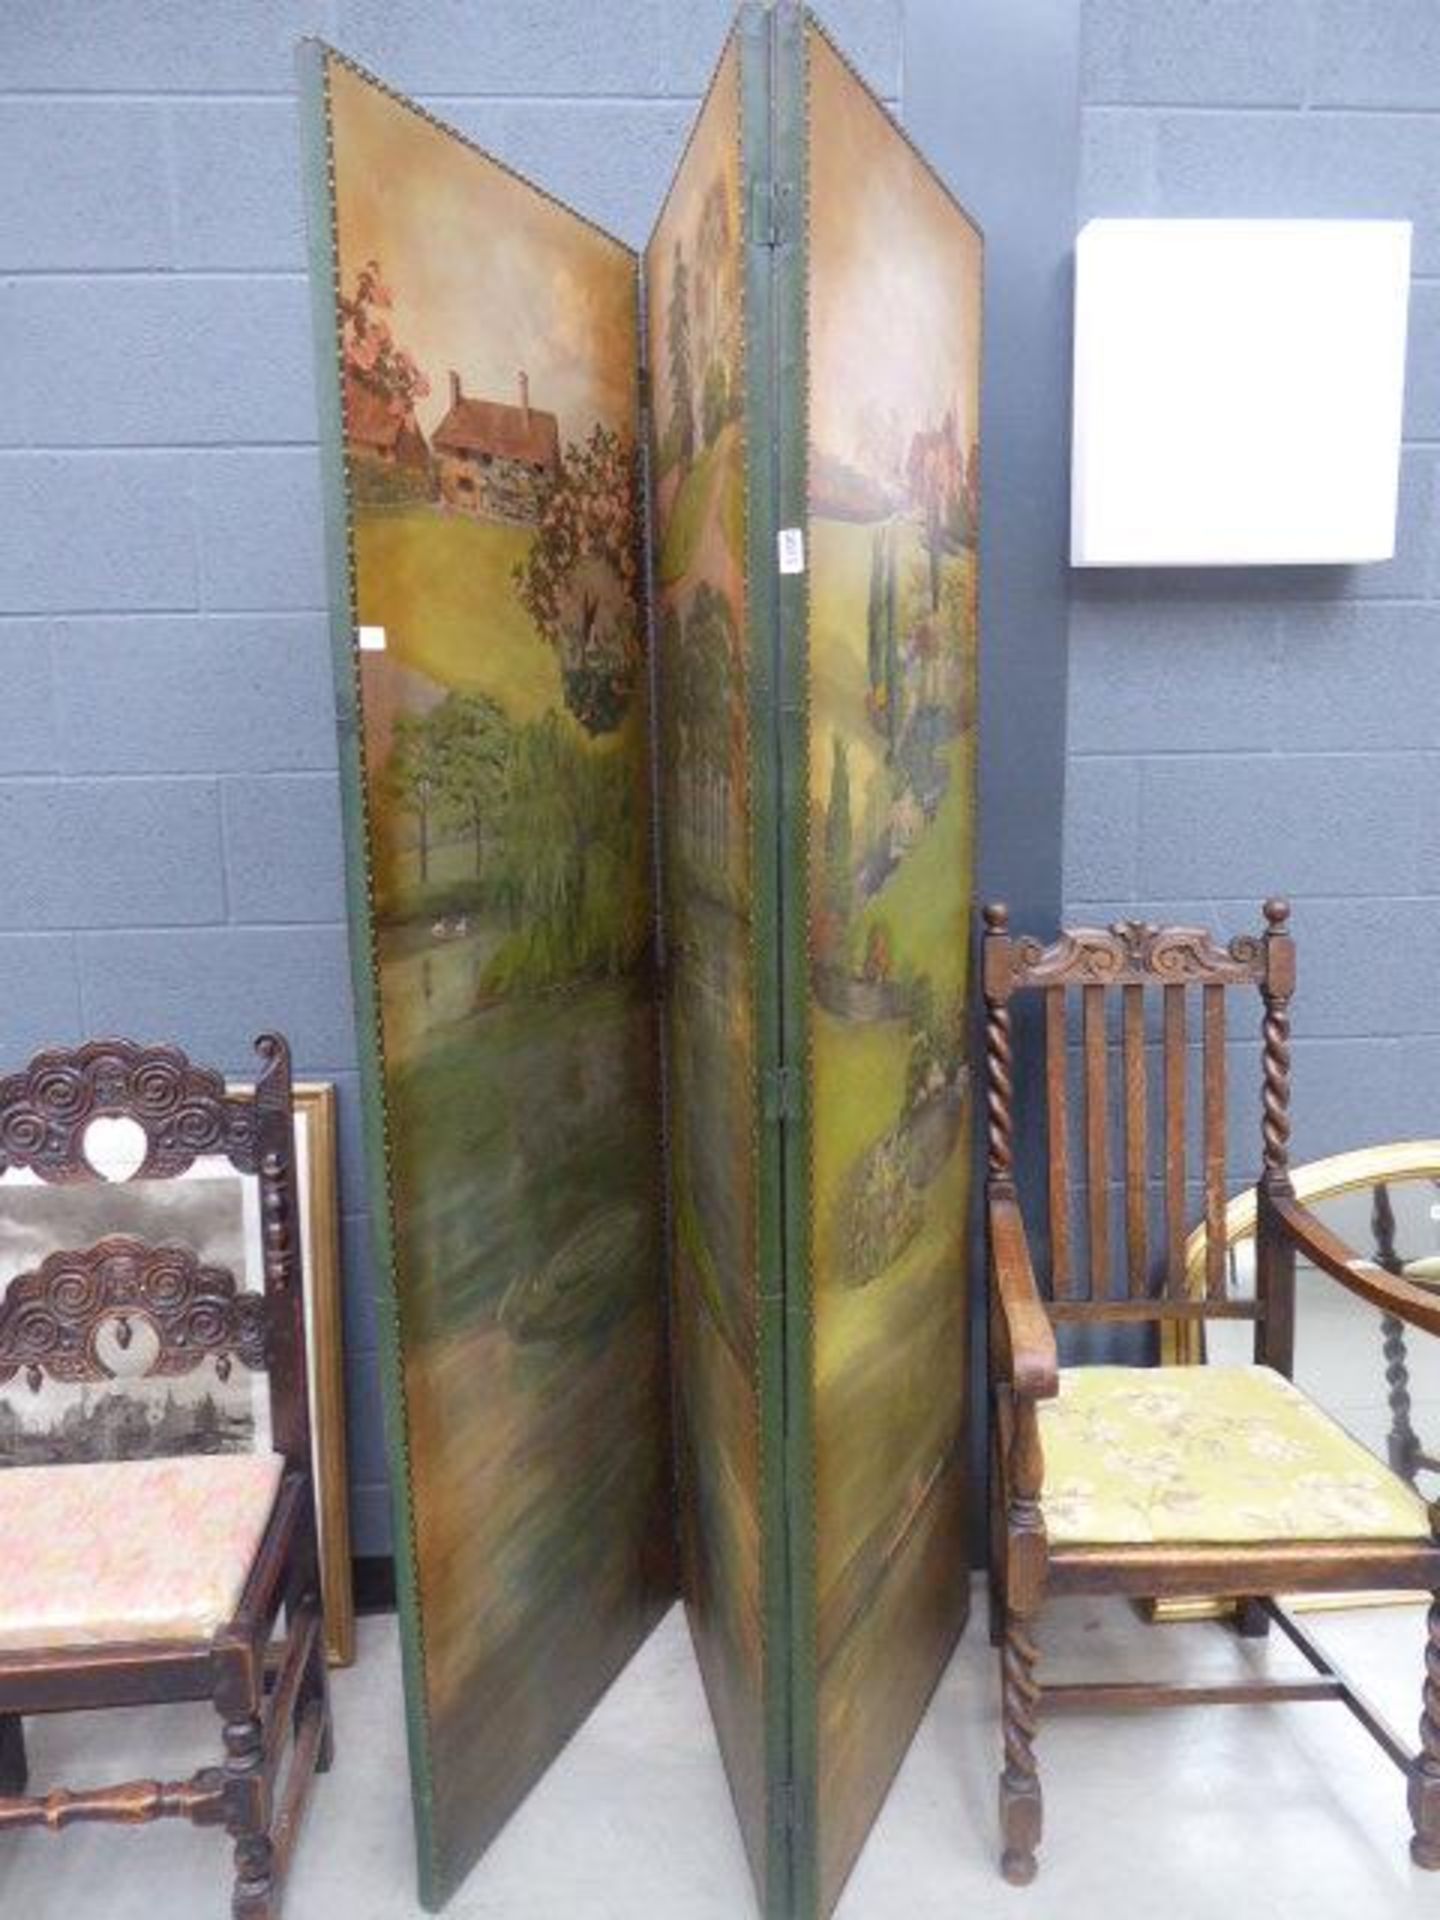 2 fold room divider with painted panels depicting country gardens